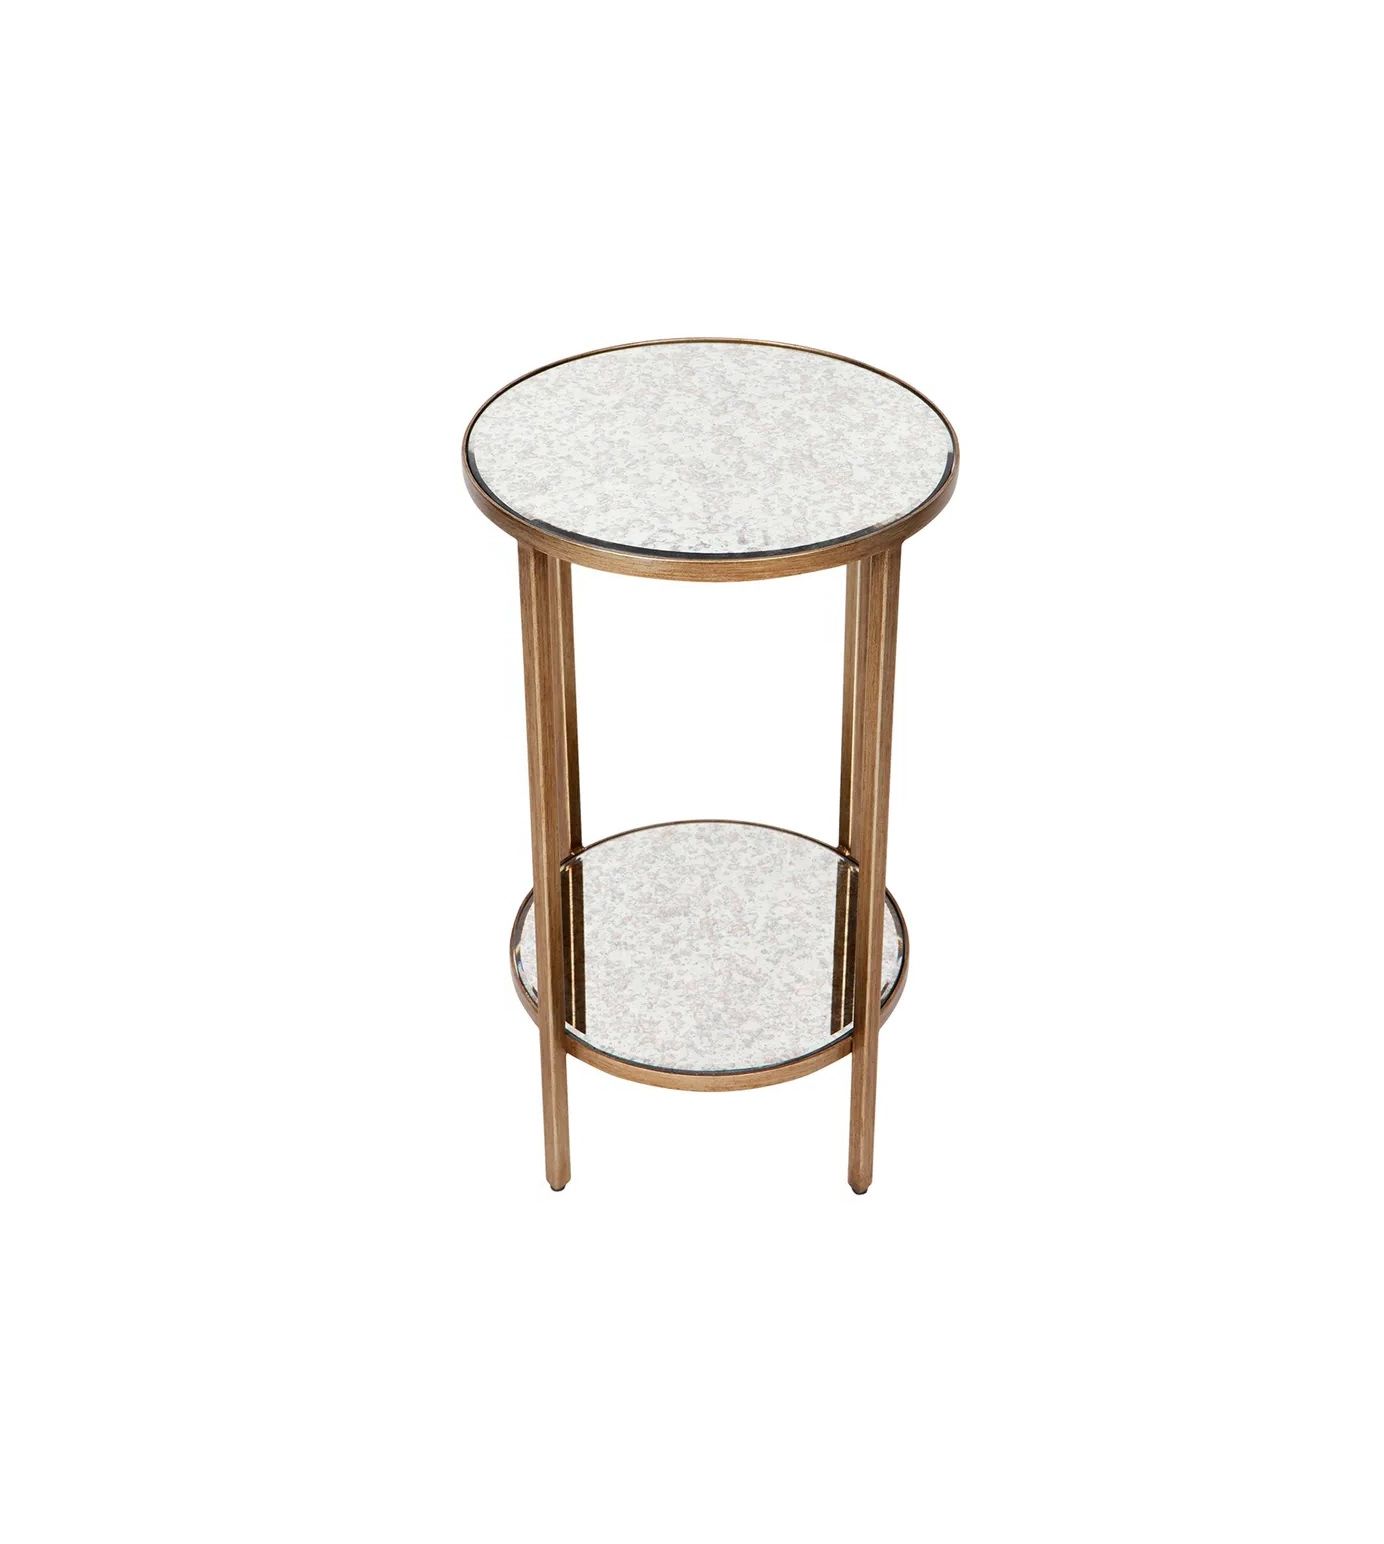 Most Recently Released Antique Mirrored Outdoor Tables Within Mirrored Cocktail Side Table Petite Antique Gold (View 7 of 15)